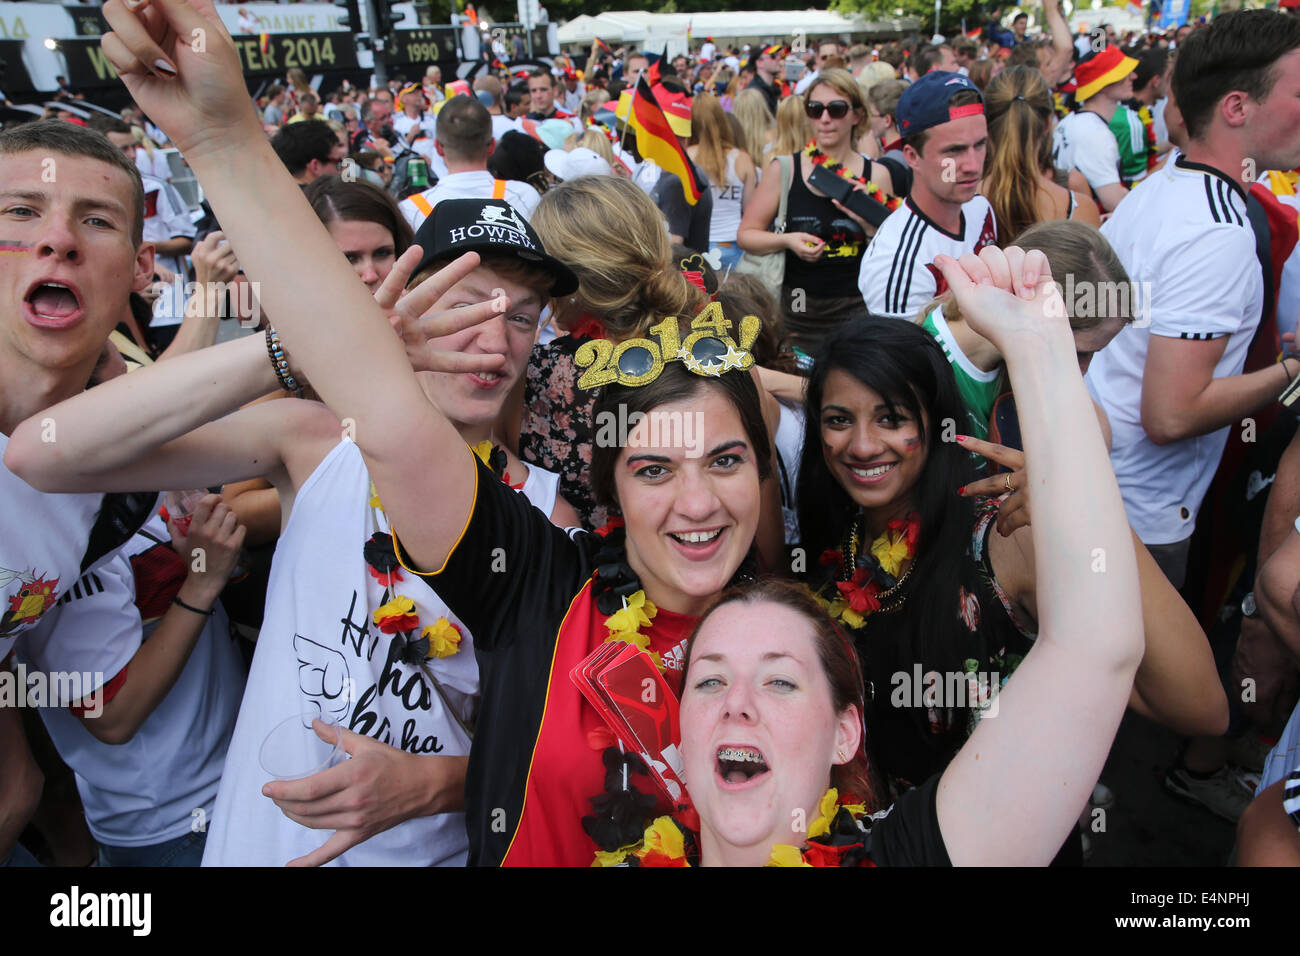 Berlin, Germany. 15th July, 2014. FAns celebrate at the reception of the German national team at the so-called 'Fan Meile' at Brandenburg Gate in Berlin, Germany, 15 July 2014. The German team on 13 July 2014 had won the Brazil 2014 FIFA Soccer World Cup final against Argentina by 1-0 to win the title for the fourth time after 1954, 1974 and 1990. Photo: KAY NIETFELD DPA/Alamy Live News Stock Photo